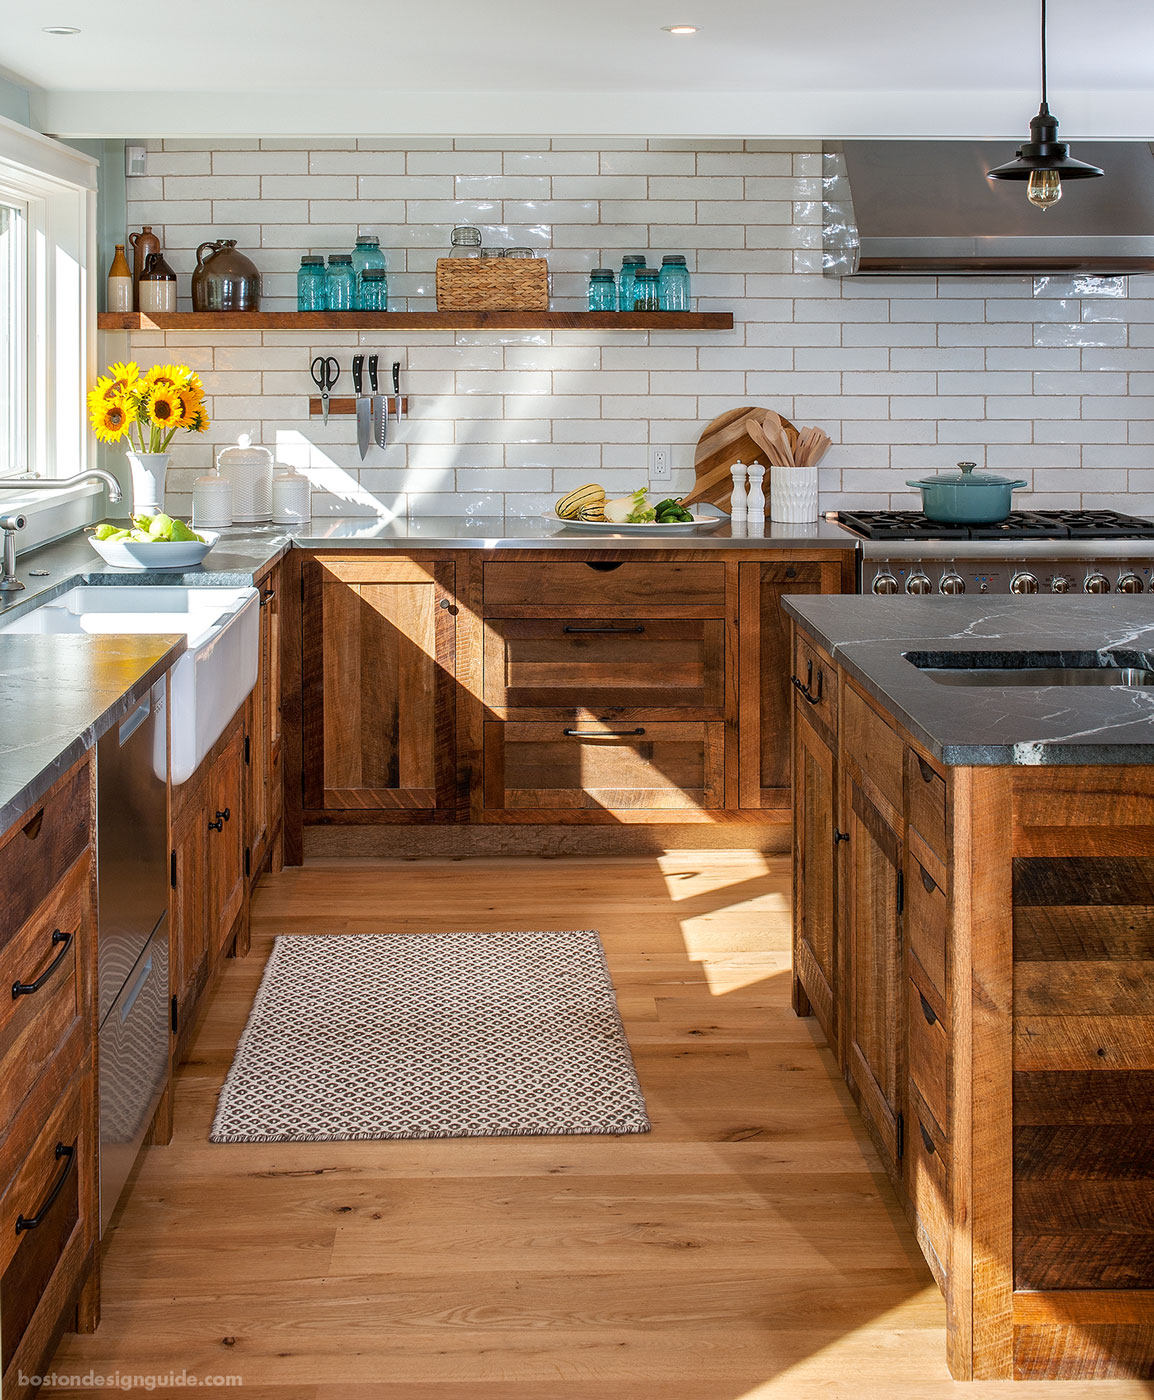 Hearty hewn custom cabinetry by Crown Point Cabinetry